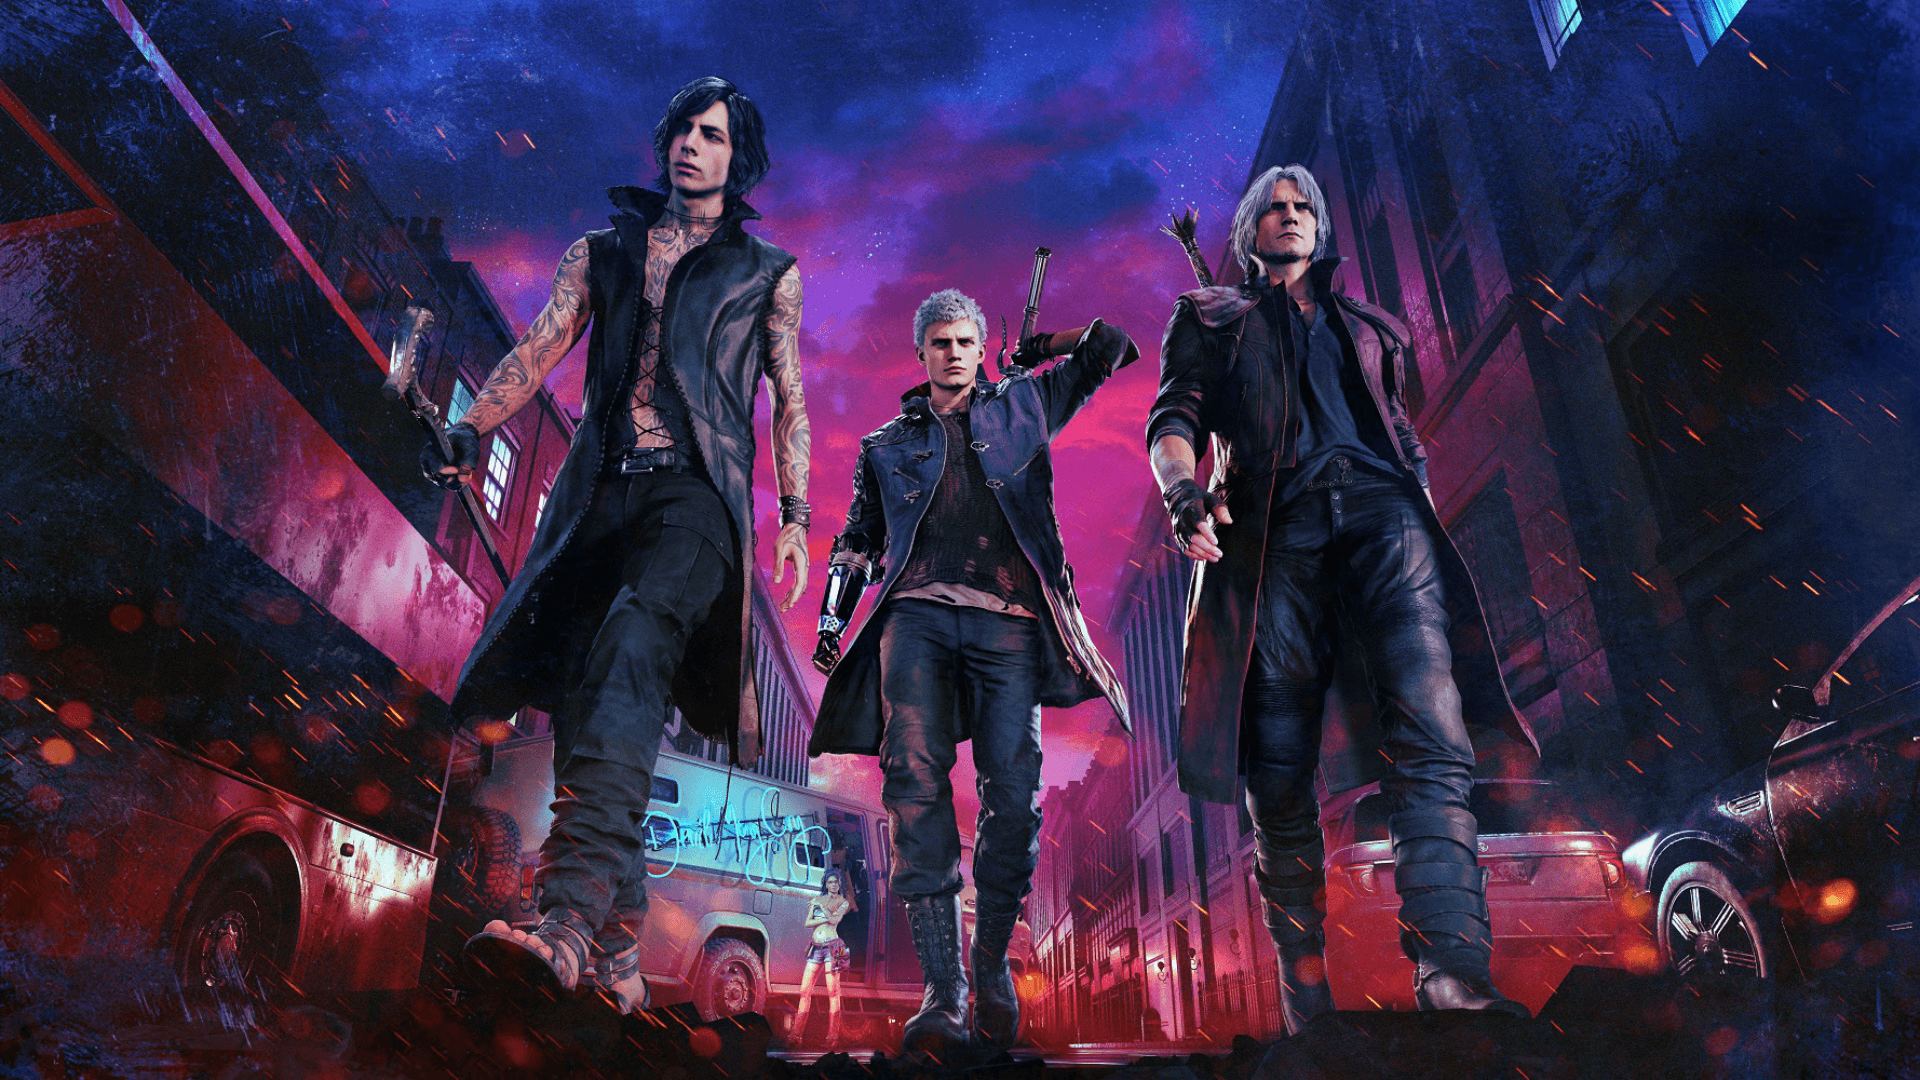 Devil May Cry 5 Edition Key Art HD Wallpaper. Background